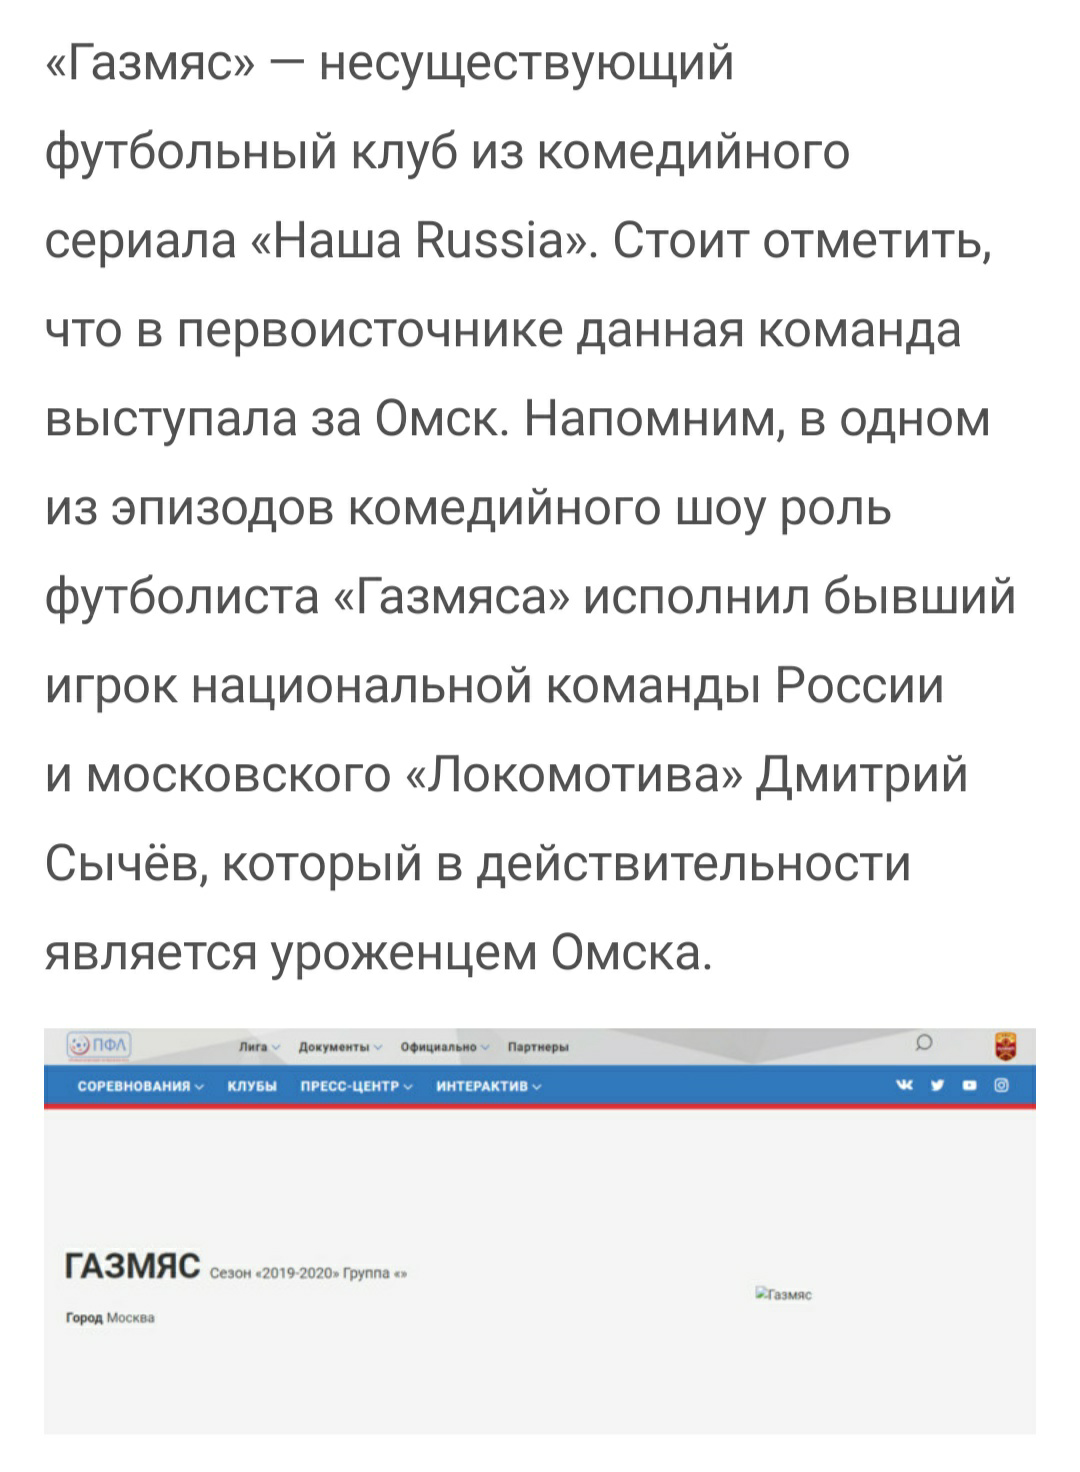 At least someone escaped from Omsk - Football, Gazmias, Omsk, Screenshot, Longpost